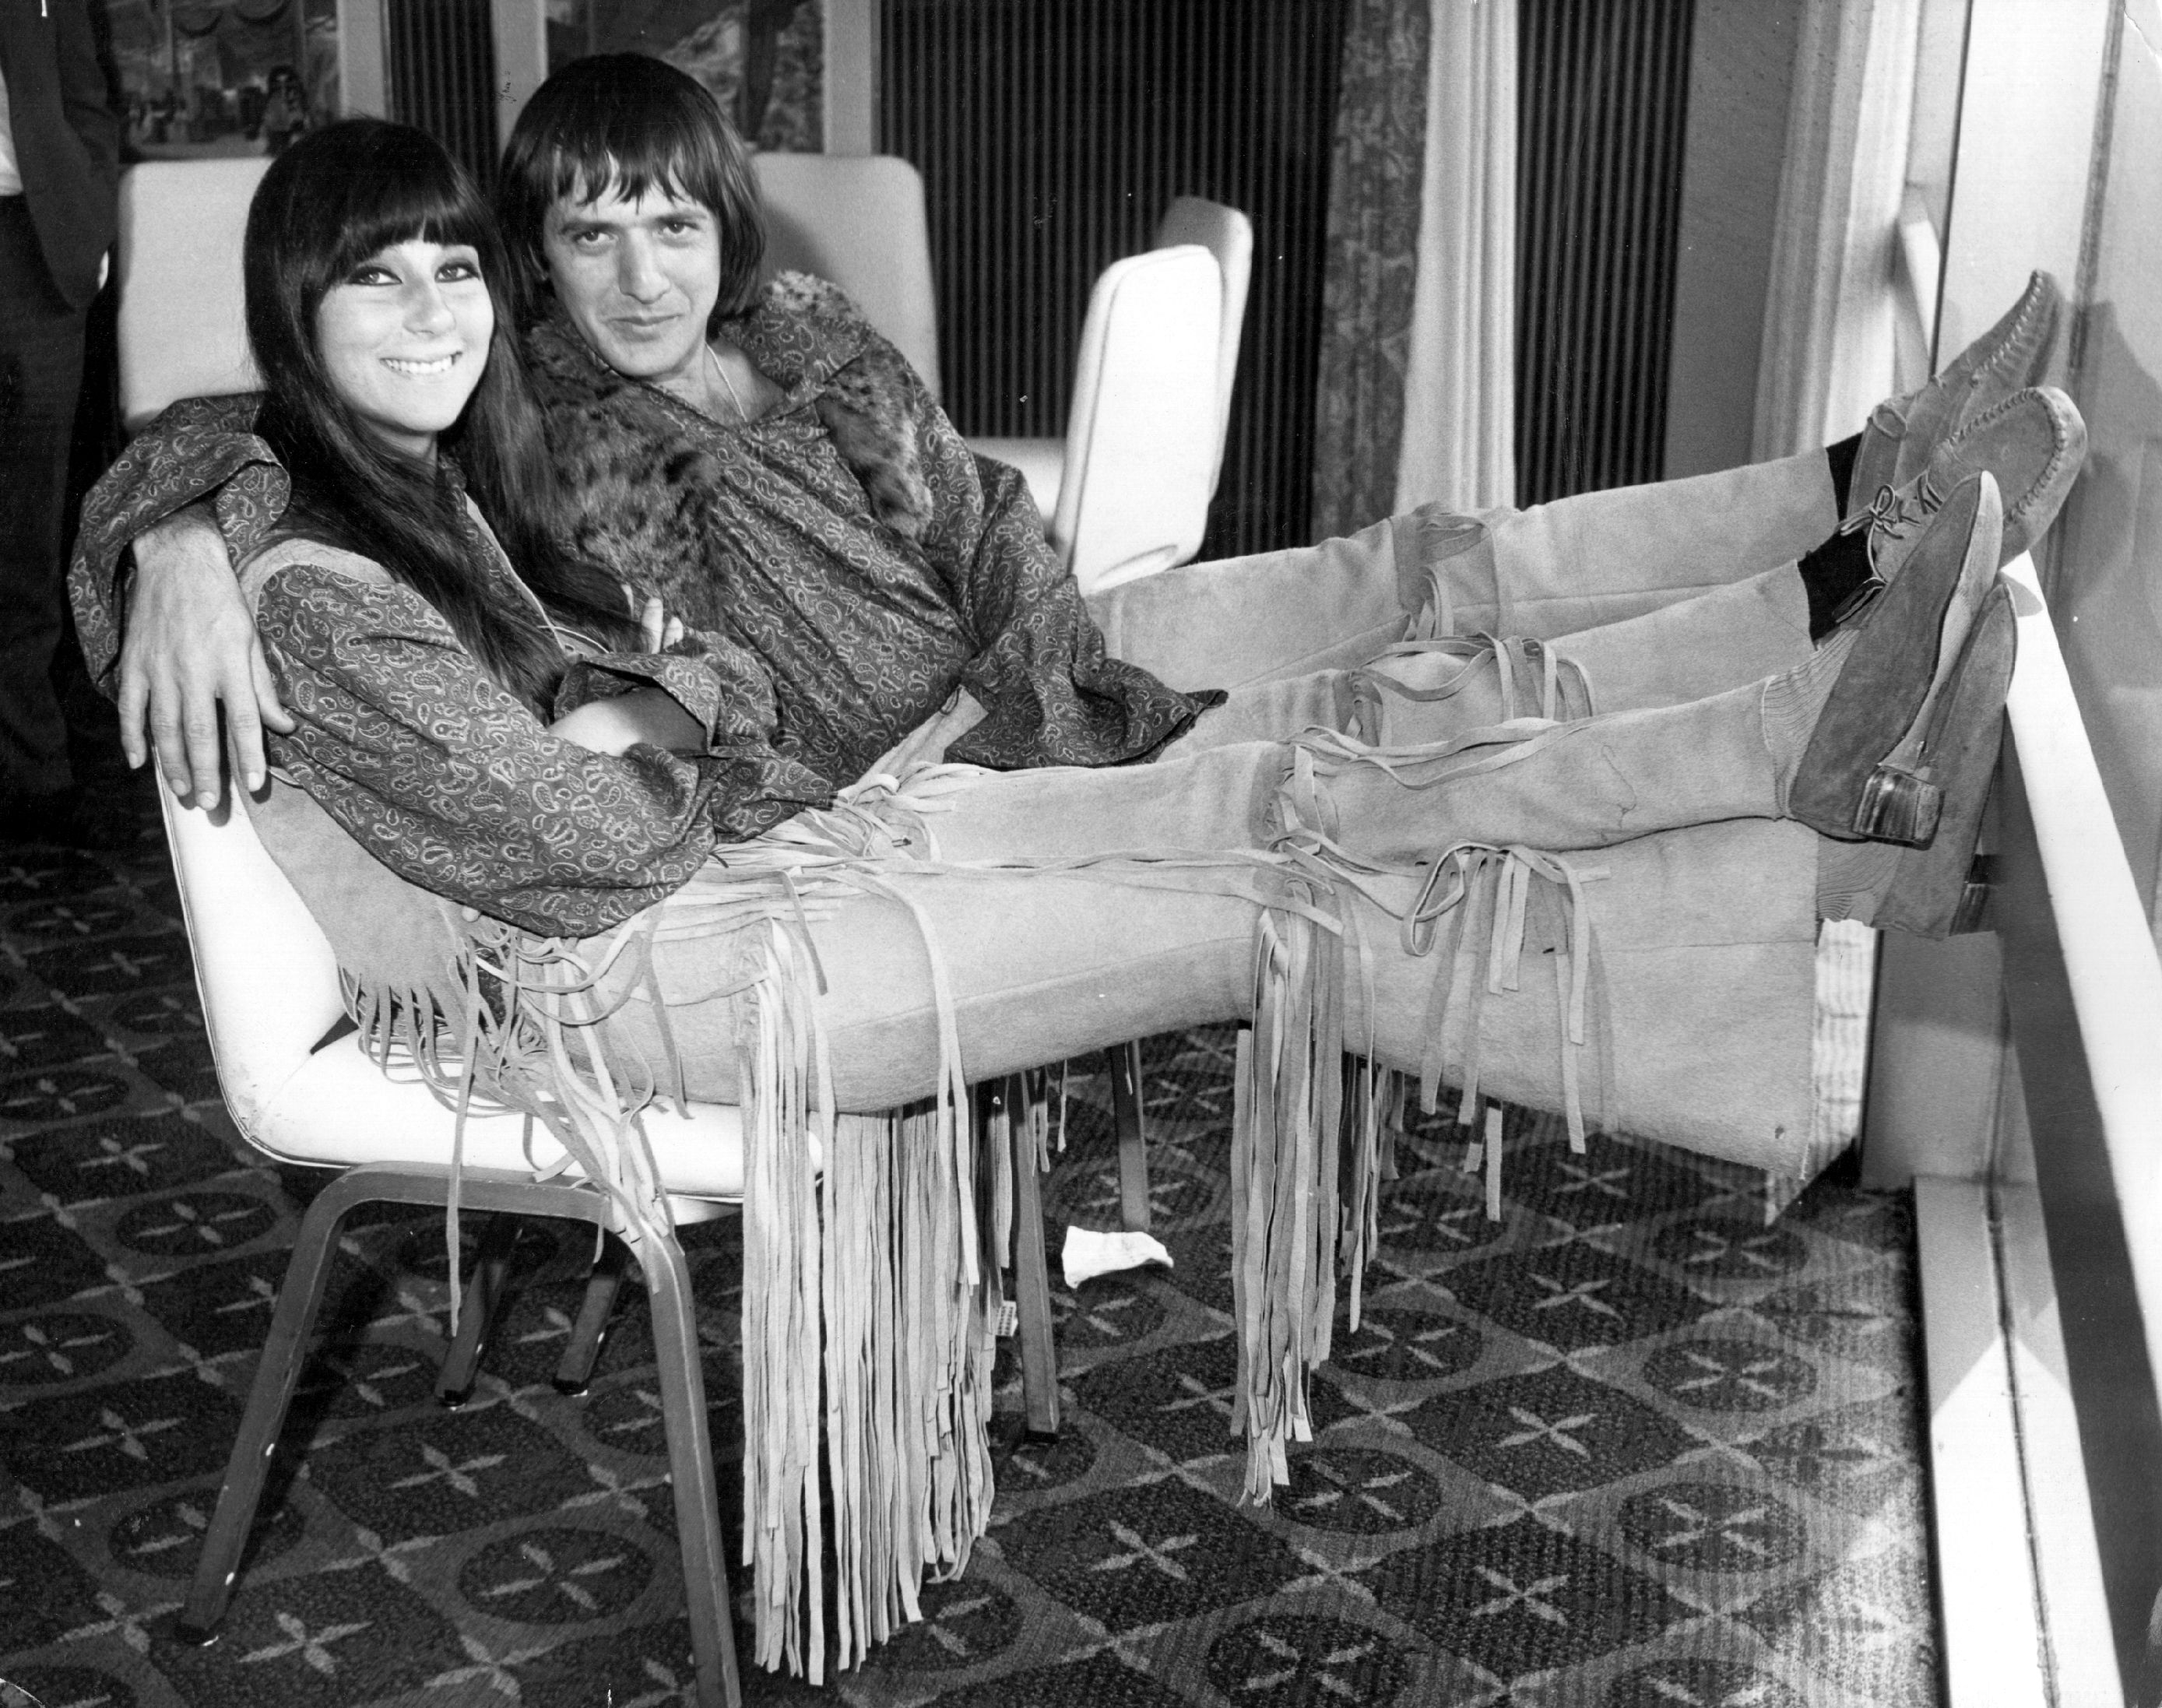 Singers Sonny Bono and Cher at the Hilton Hotel in London August 3, 1965 |  Source: Getty Images